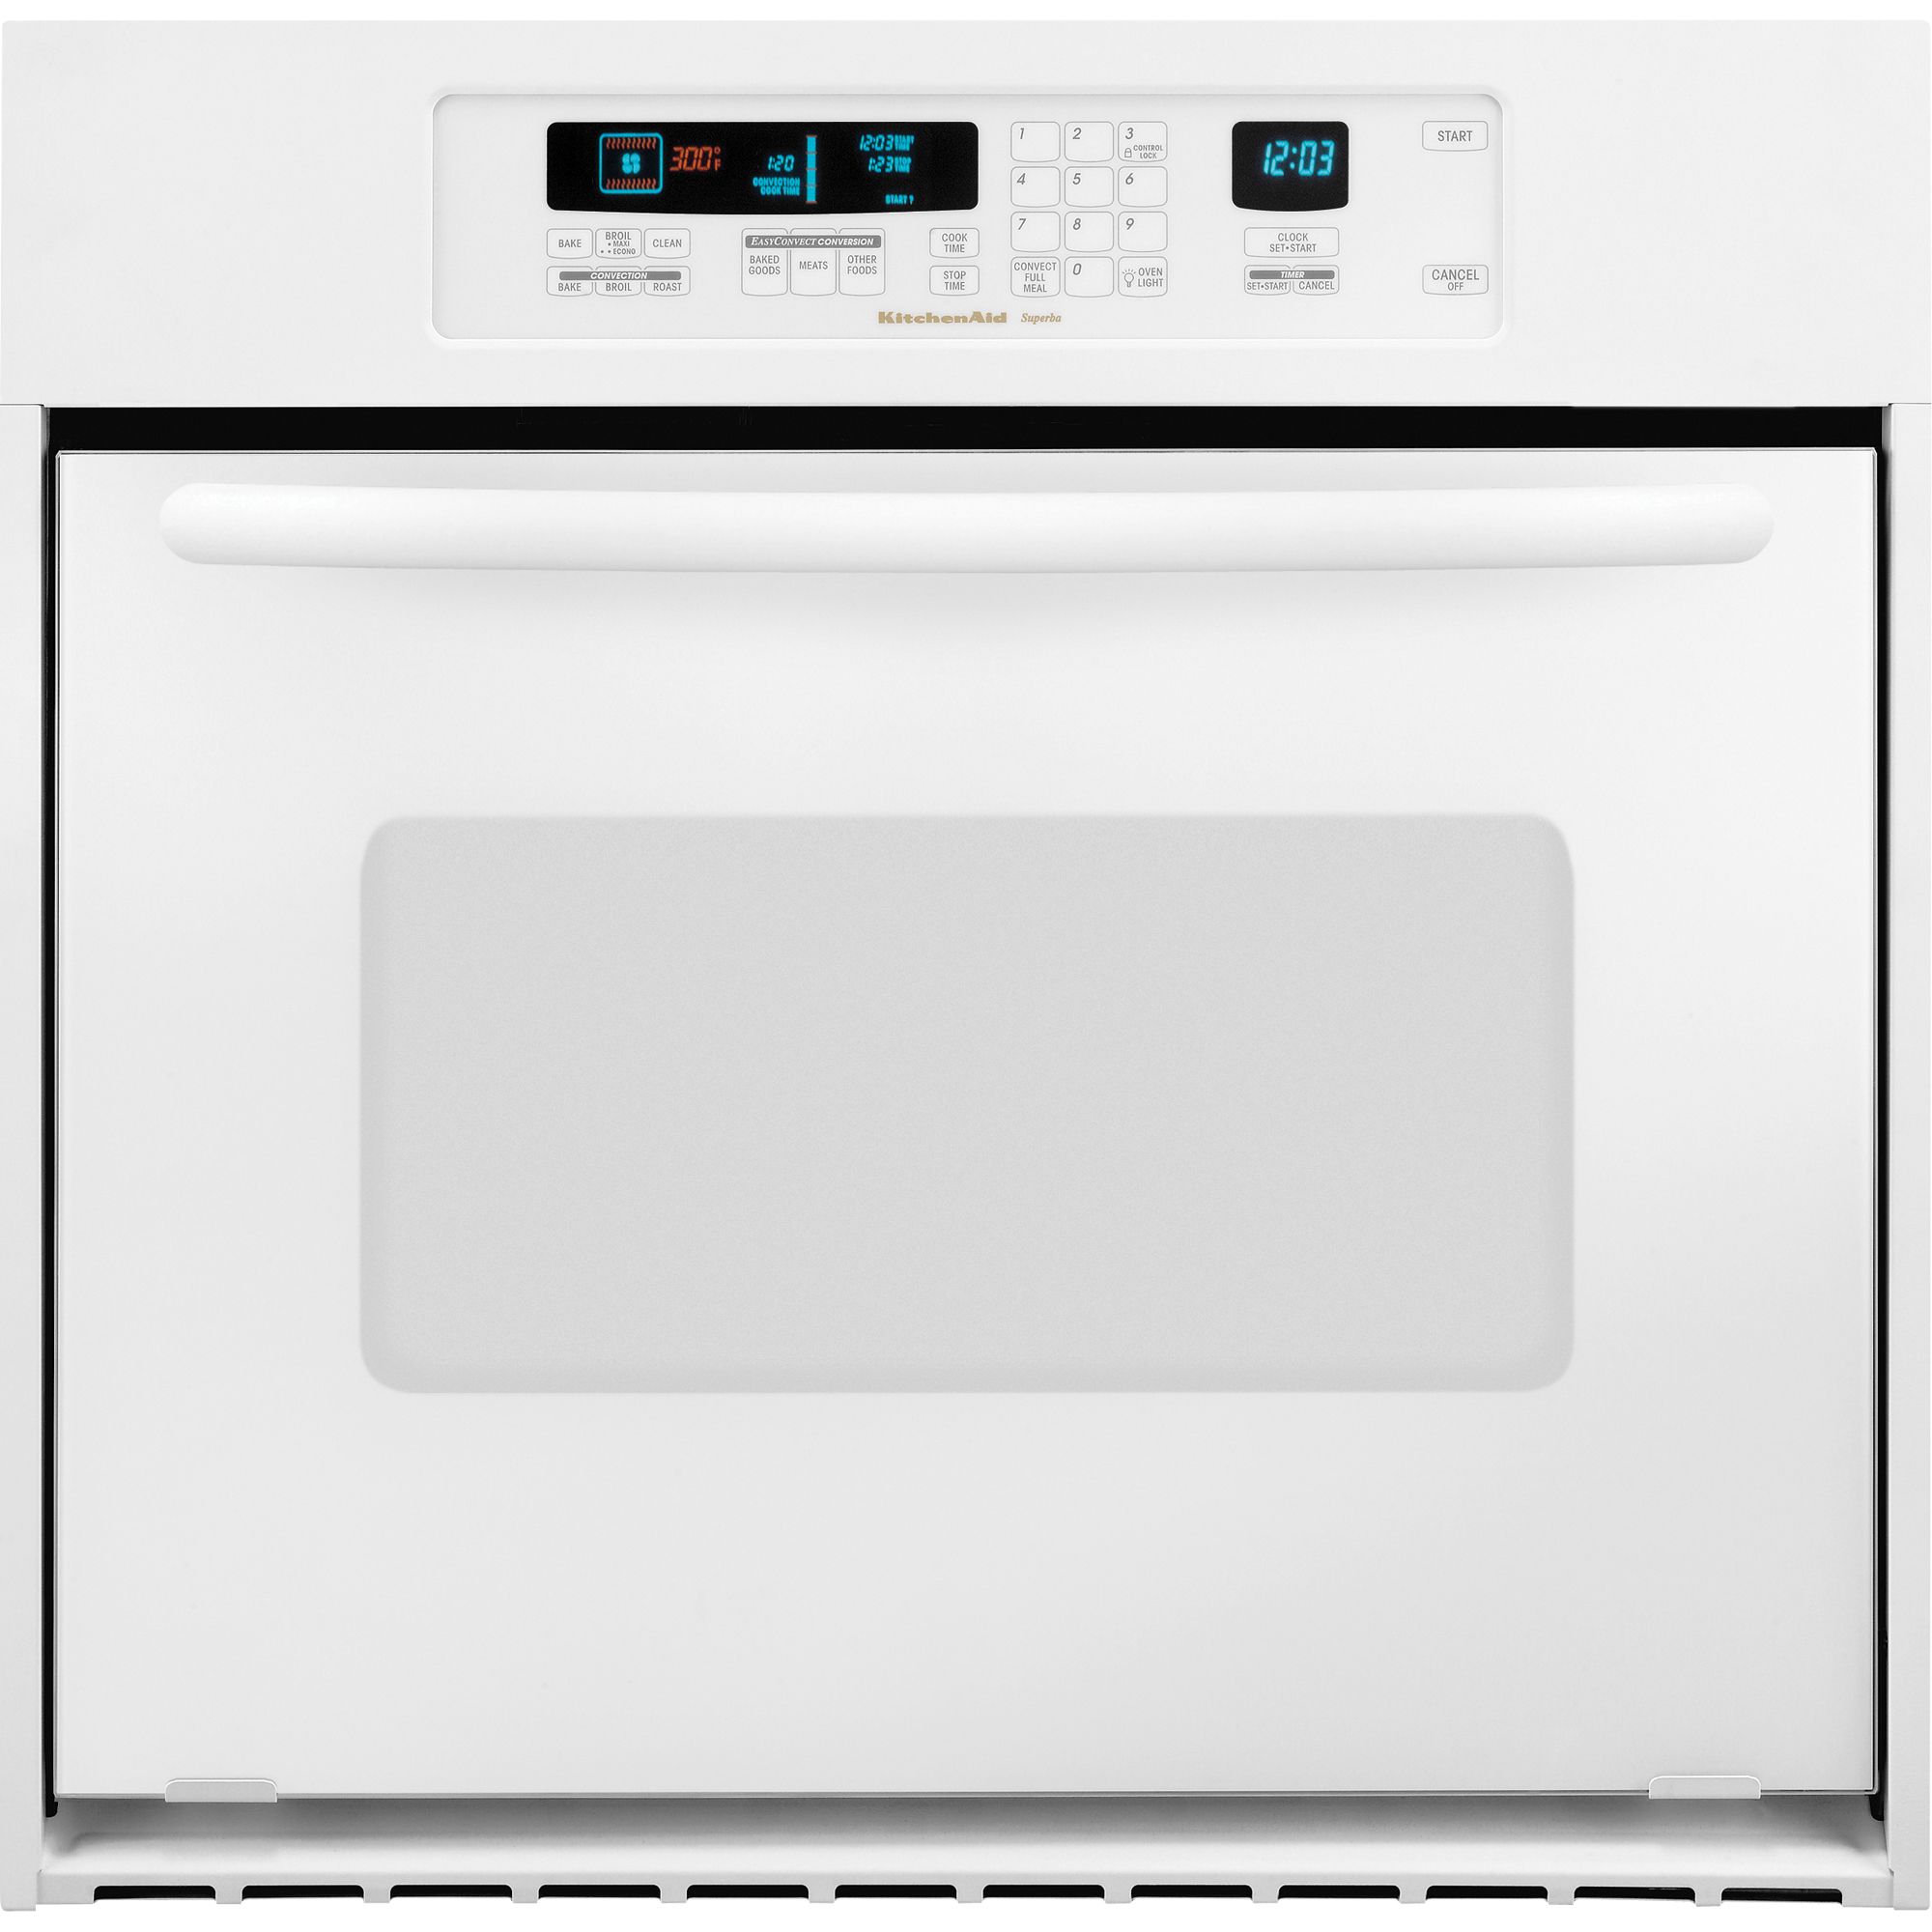 24" Electric Built-In Self-Cleaning Oven logo